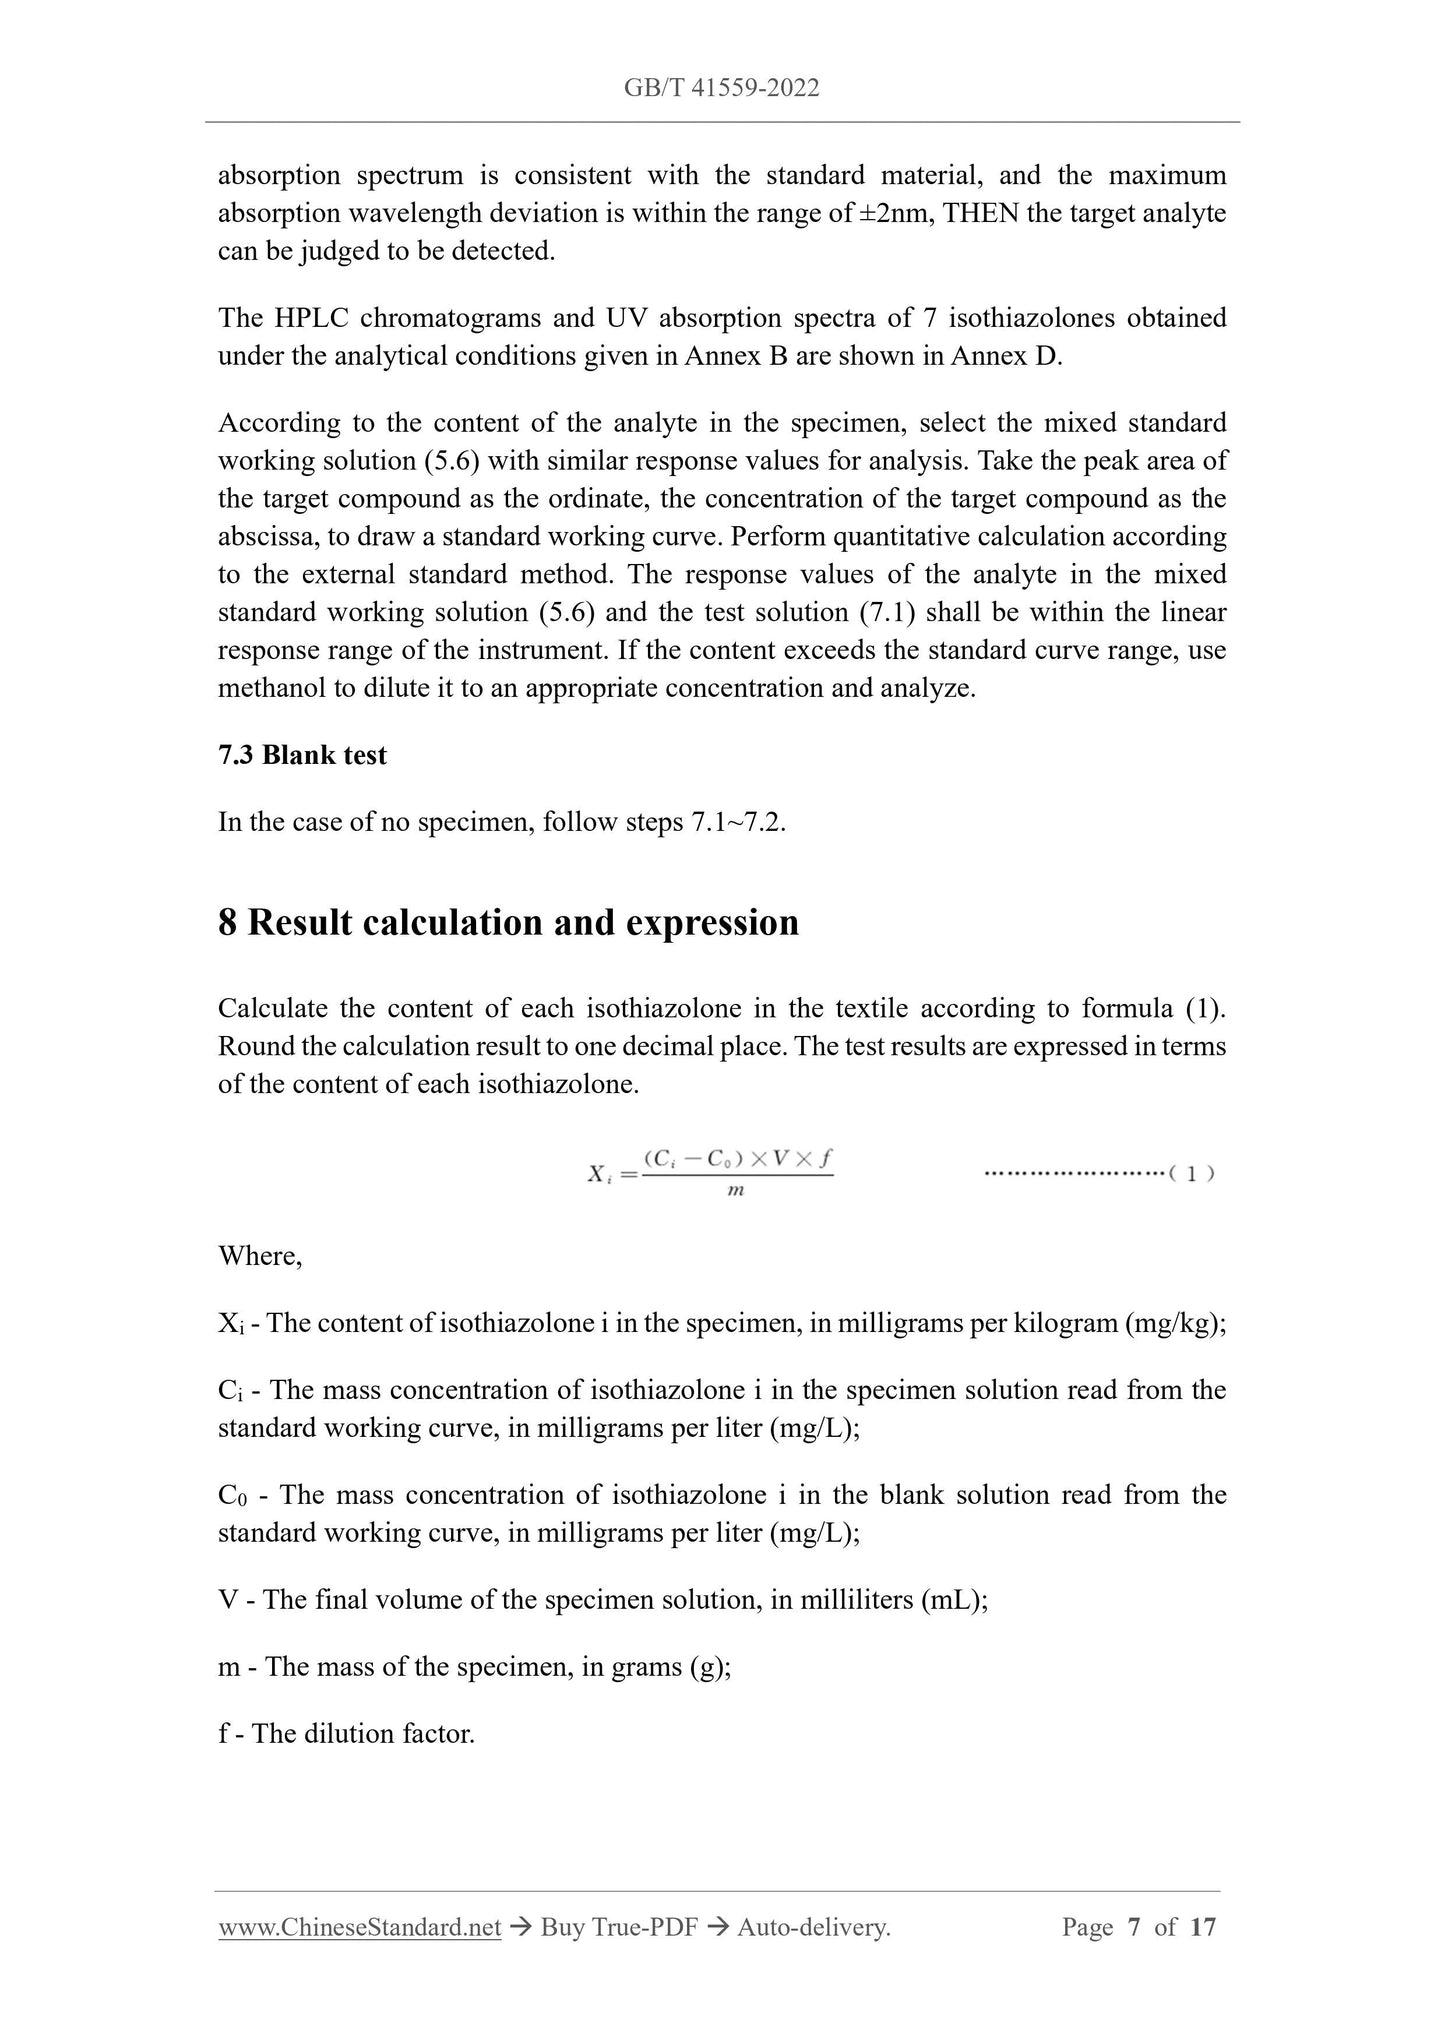 GB/T 41559-2022 Page 5